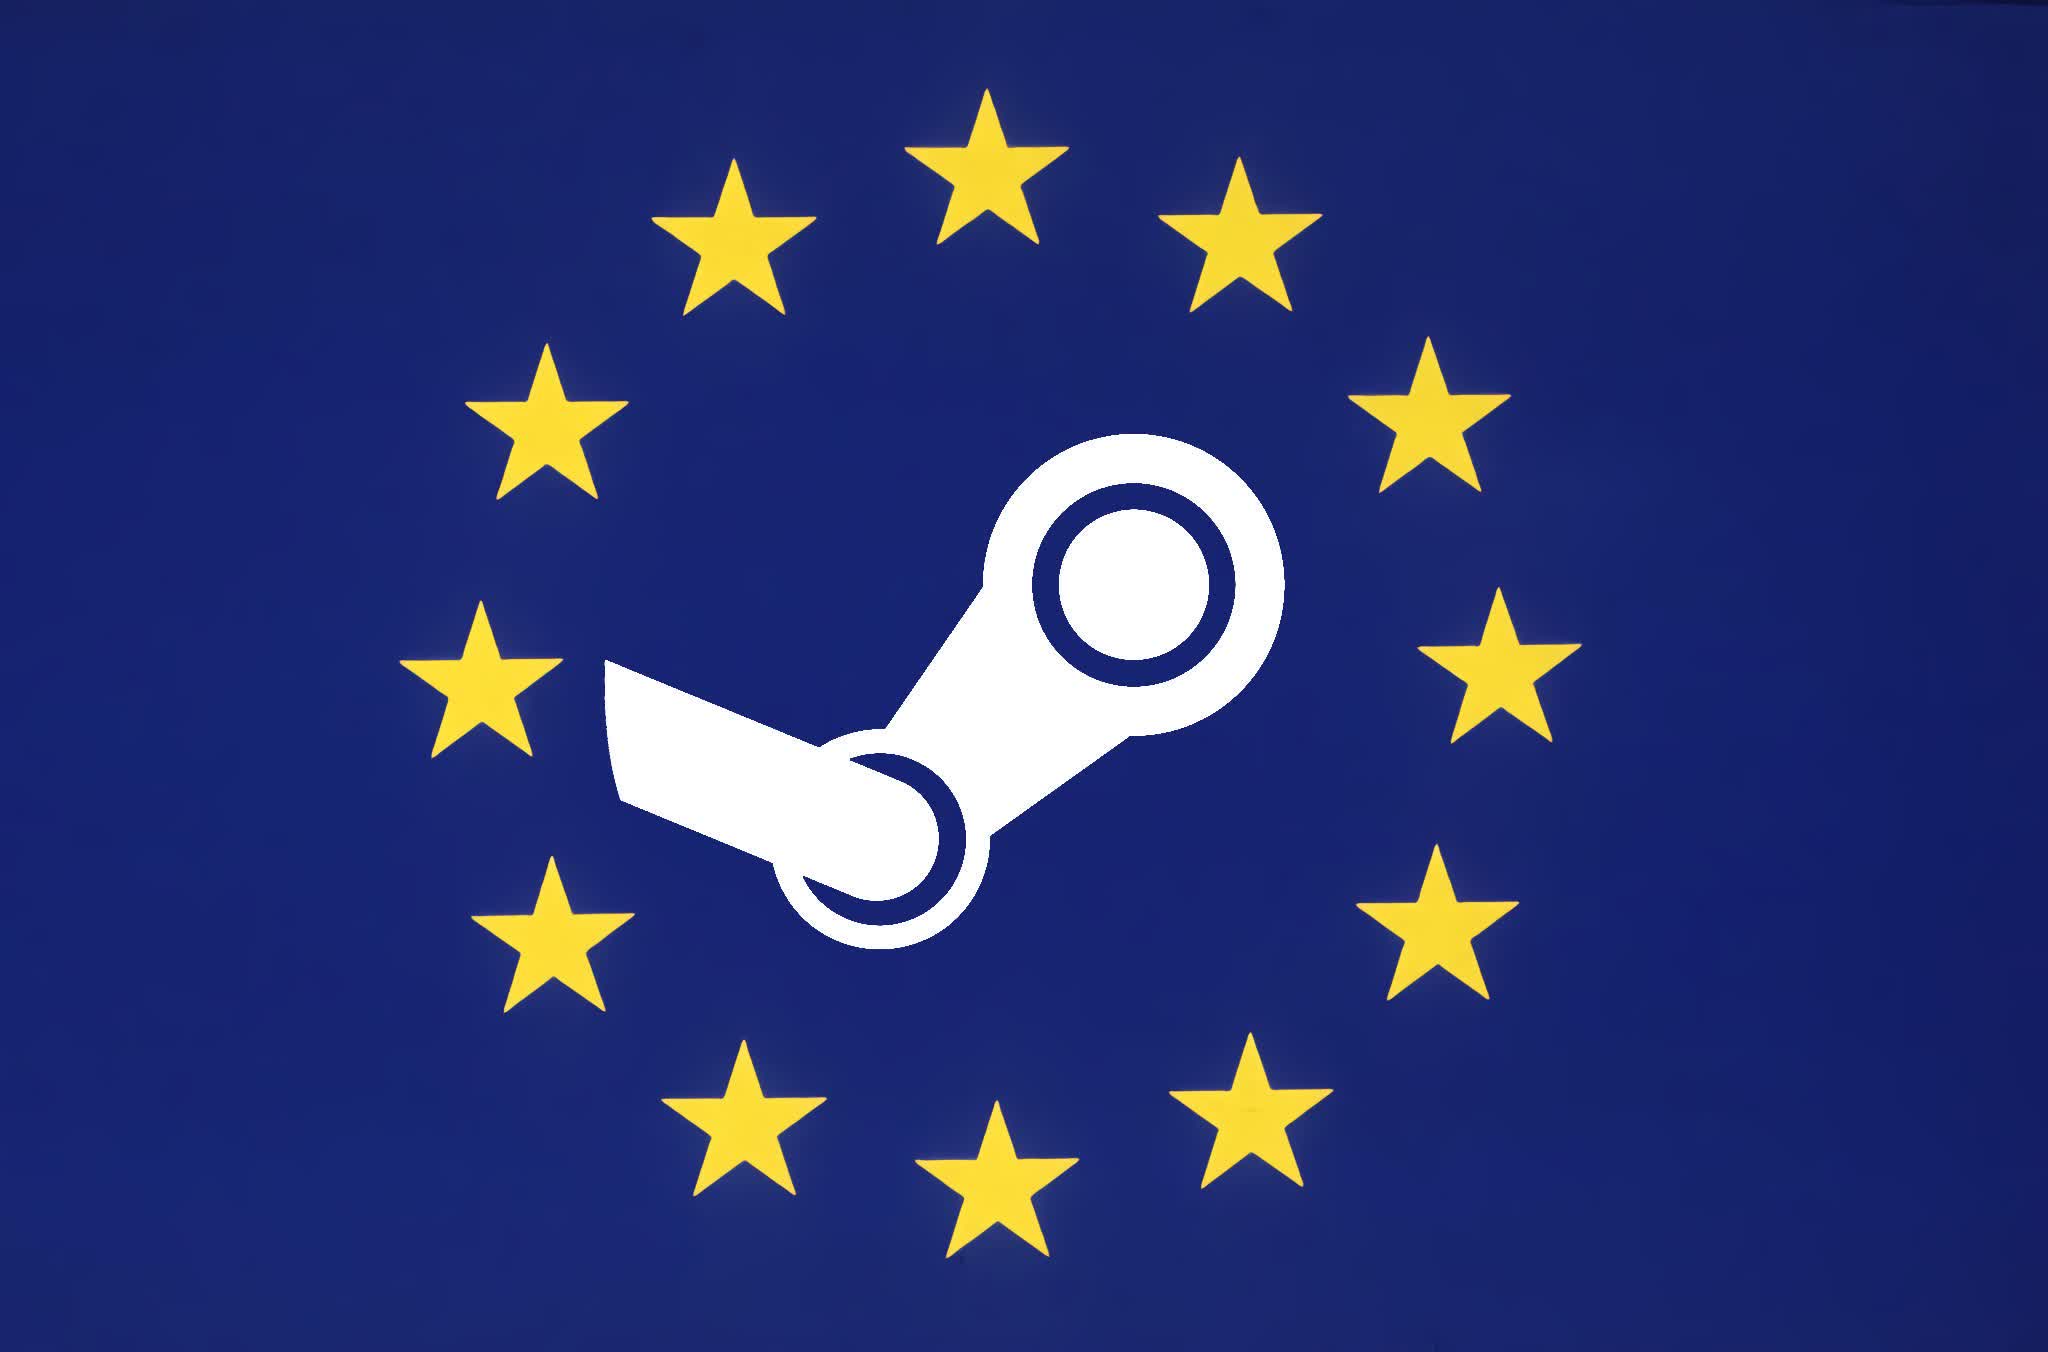 European Commission levies $9.5 million in fines for 'geo-blocked' Steam games